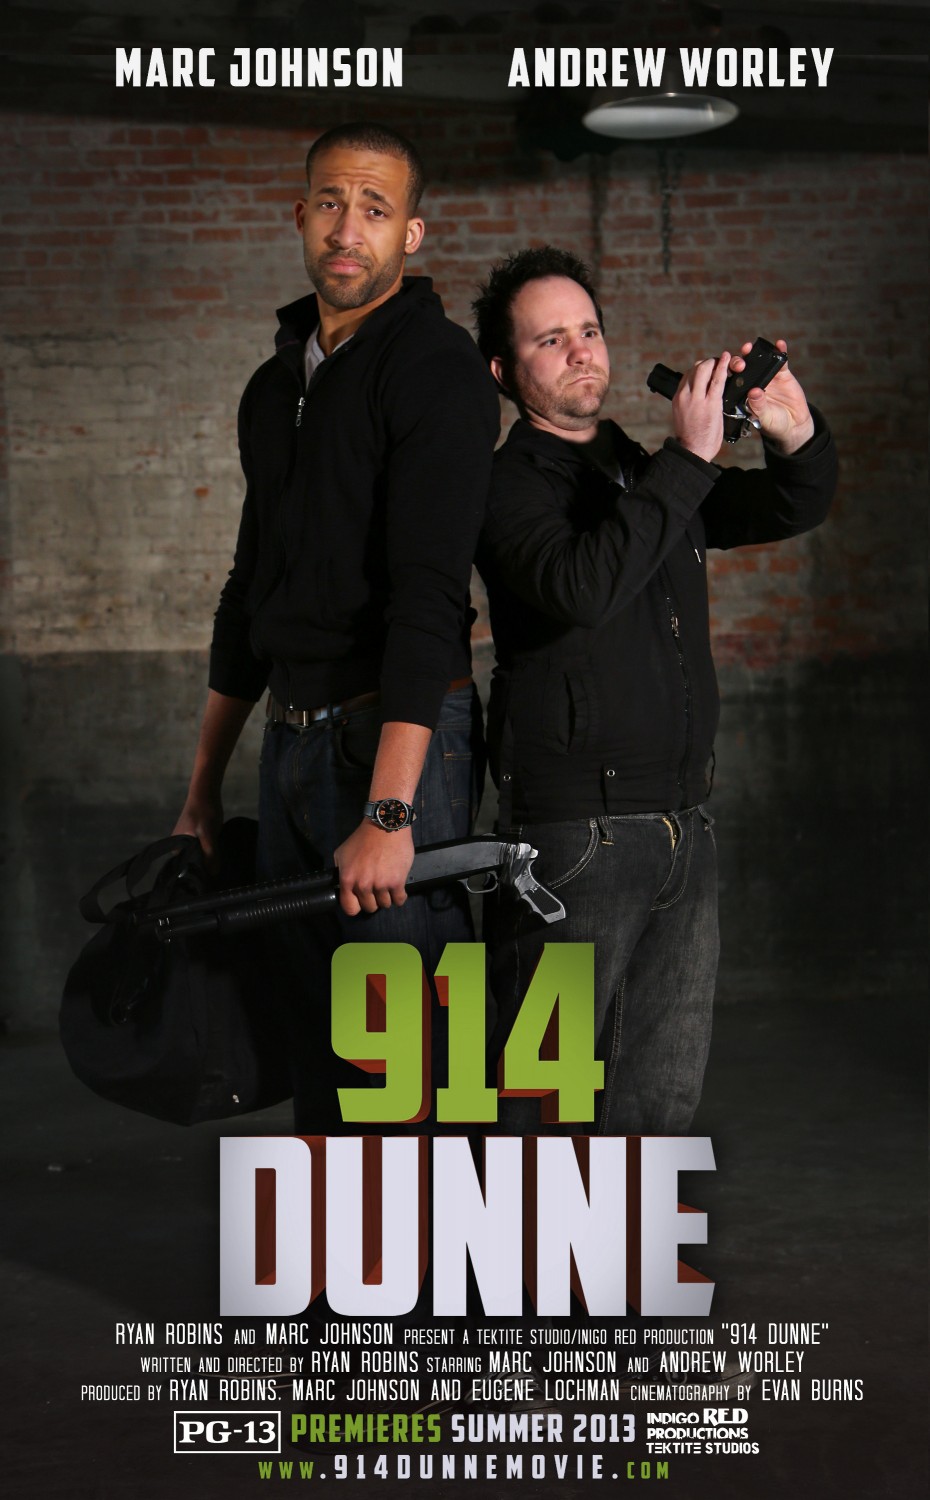 Extra Large Movie Poster Image for 914 Dunne